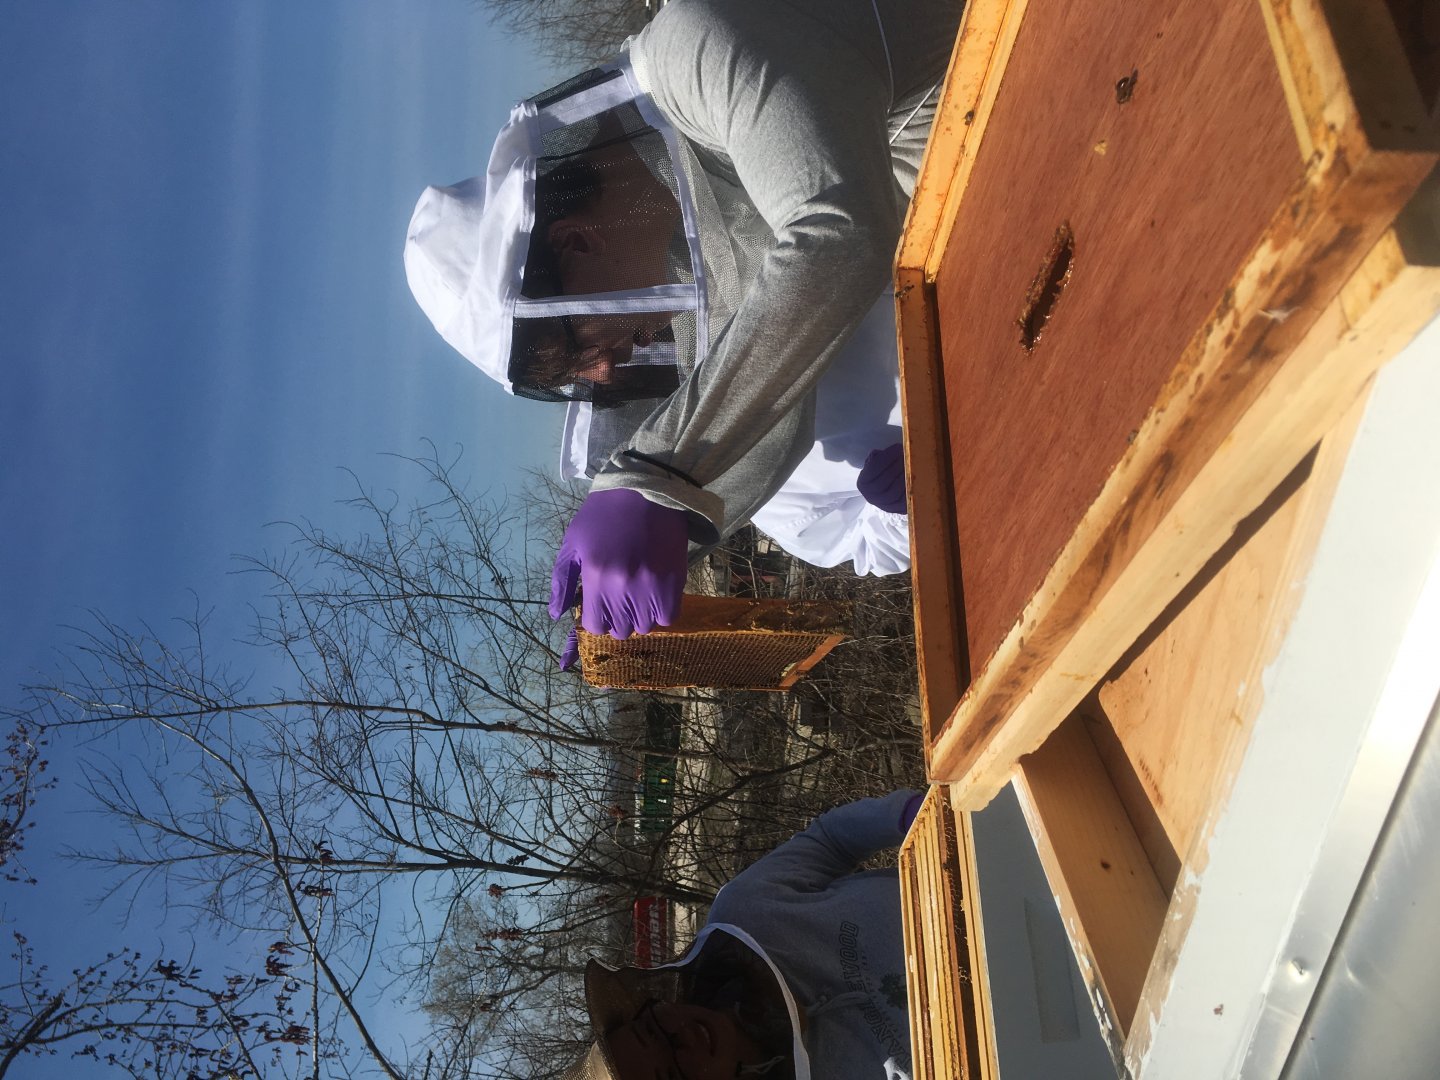 Beekeeper inspecting a hive frame